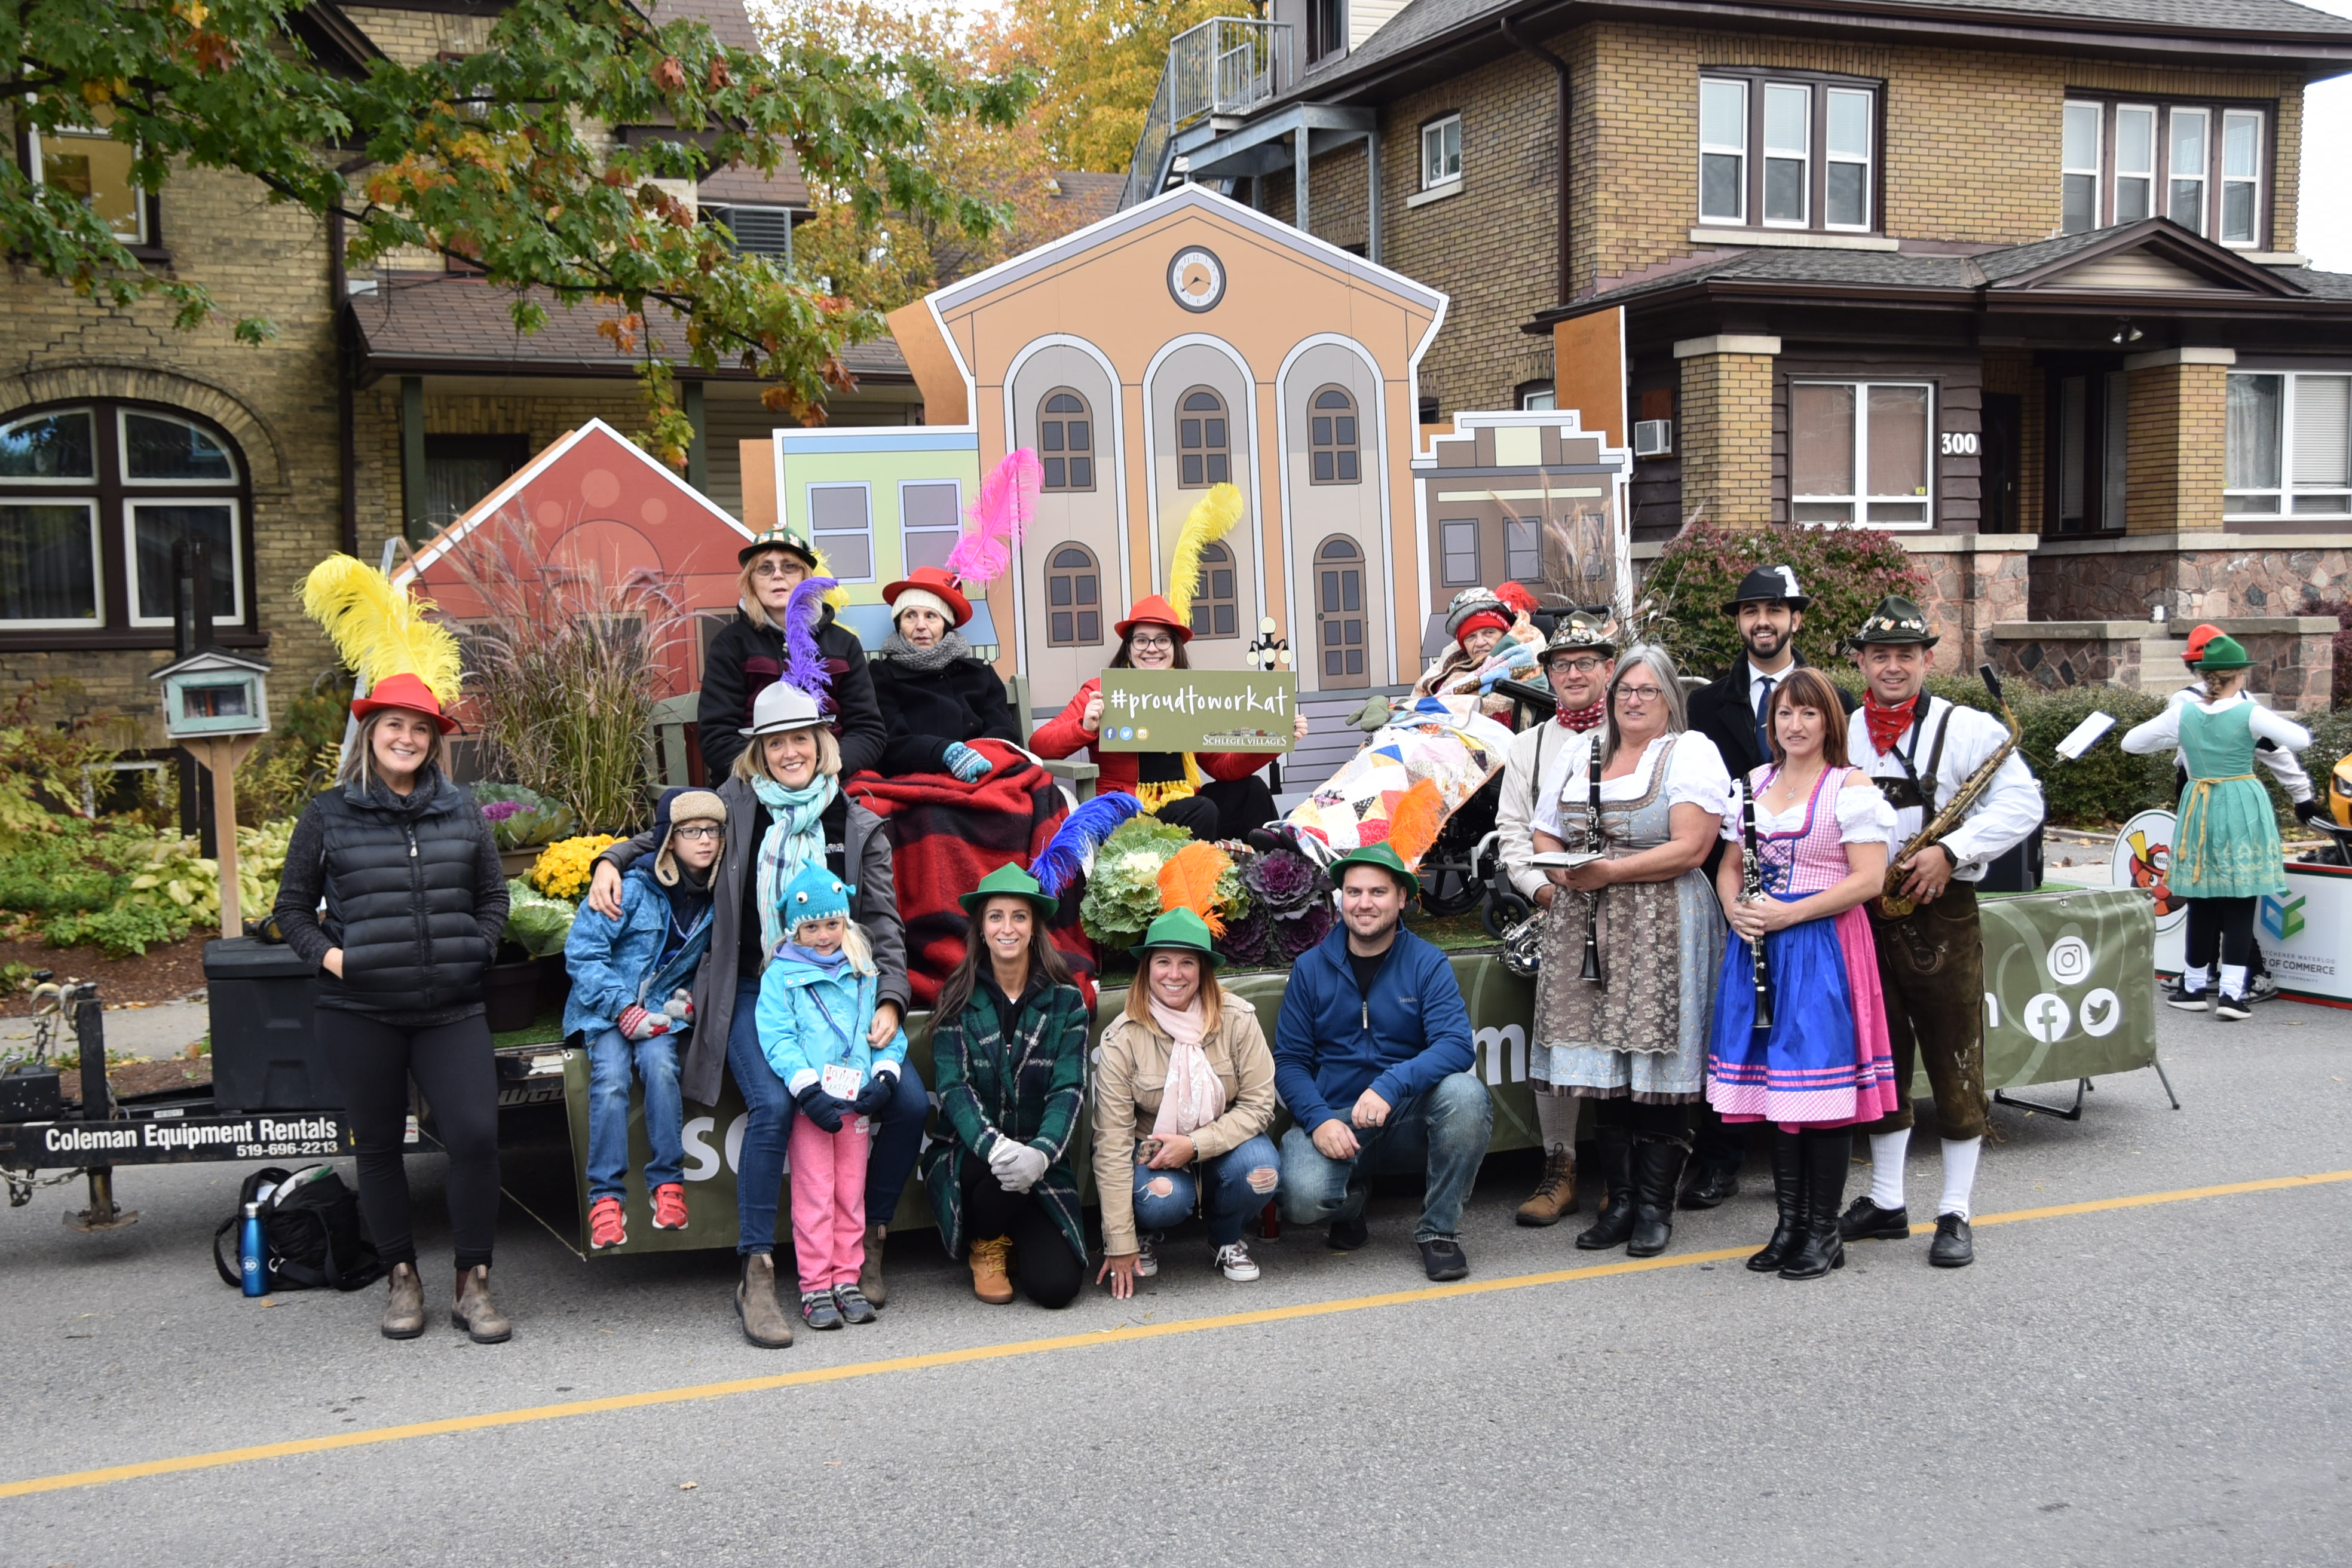 Schlegel Villages Team Members and Residents enjoyed taking part in the annual Oktoberfest Parade.